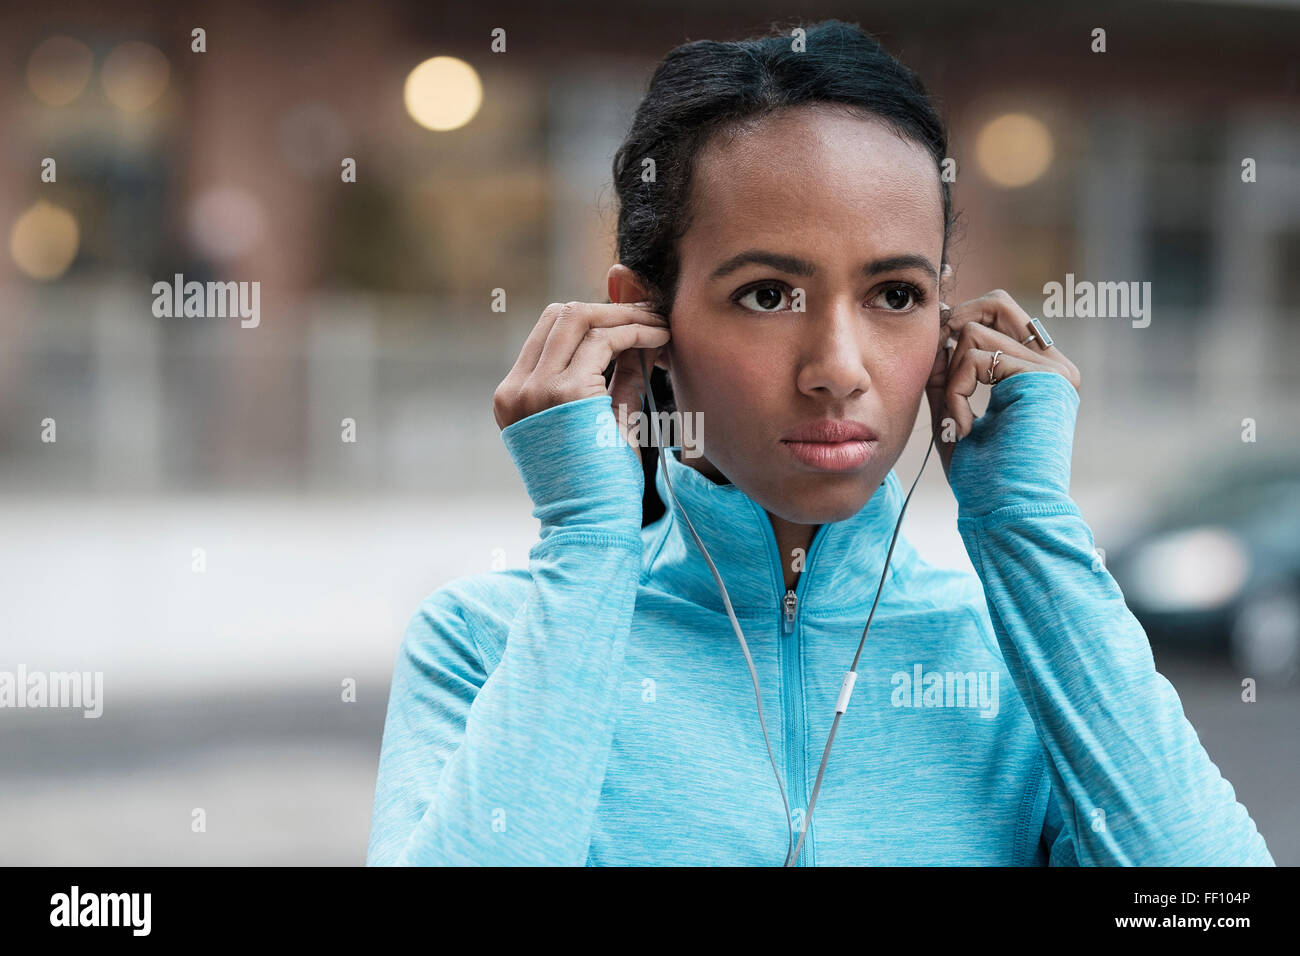 Mixed race runner listening to earbuds Stock Photo